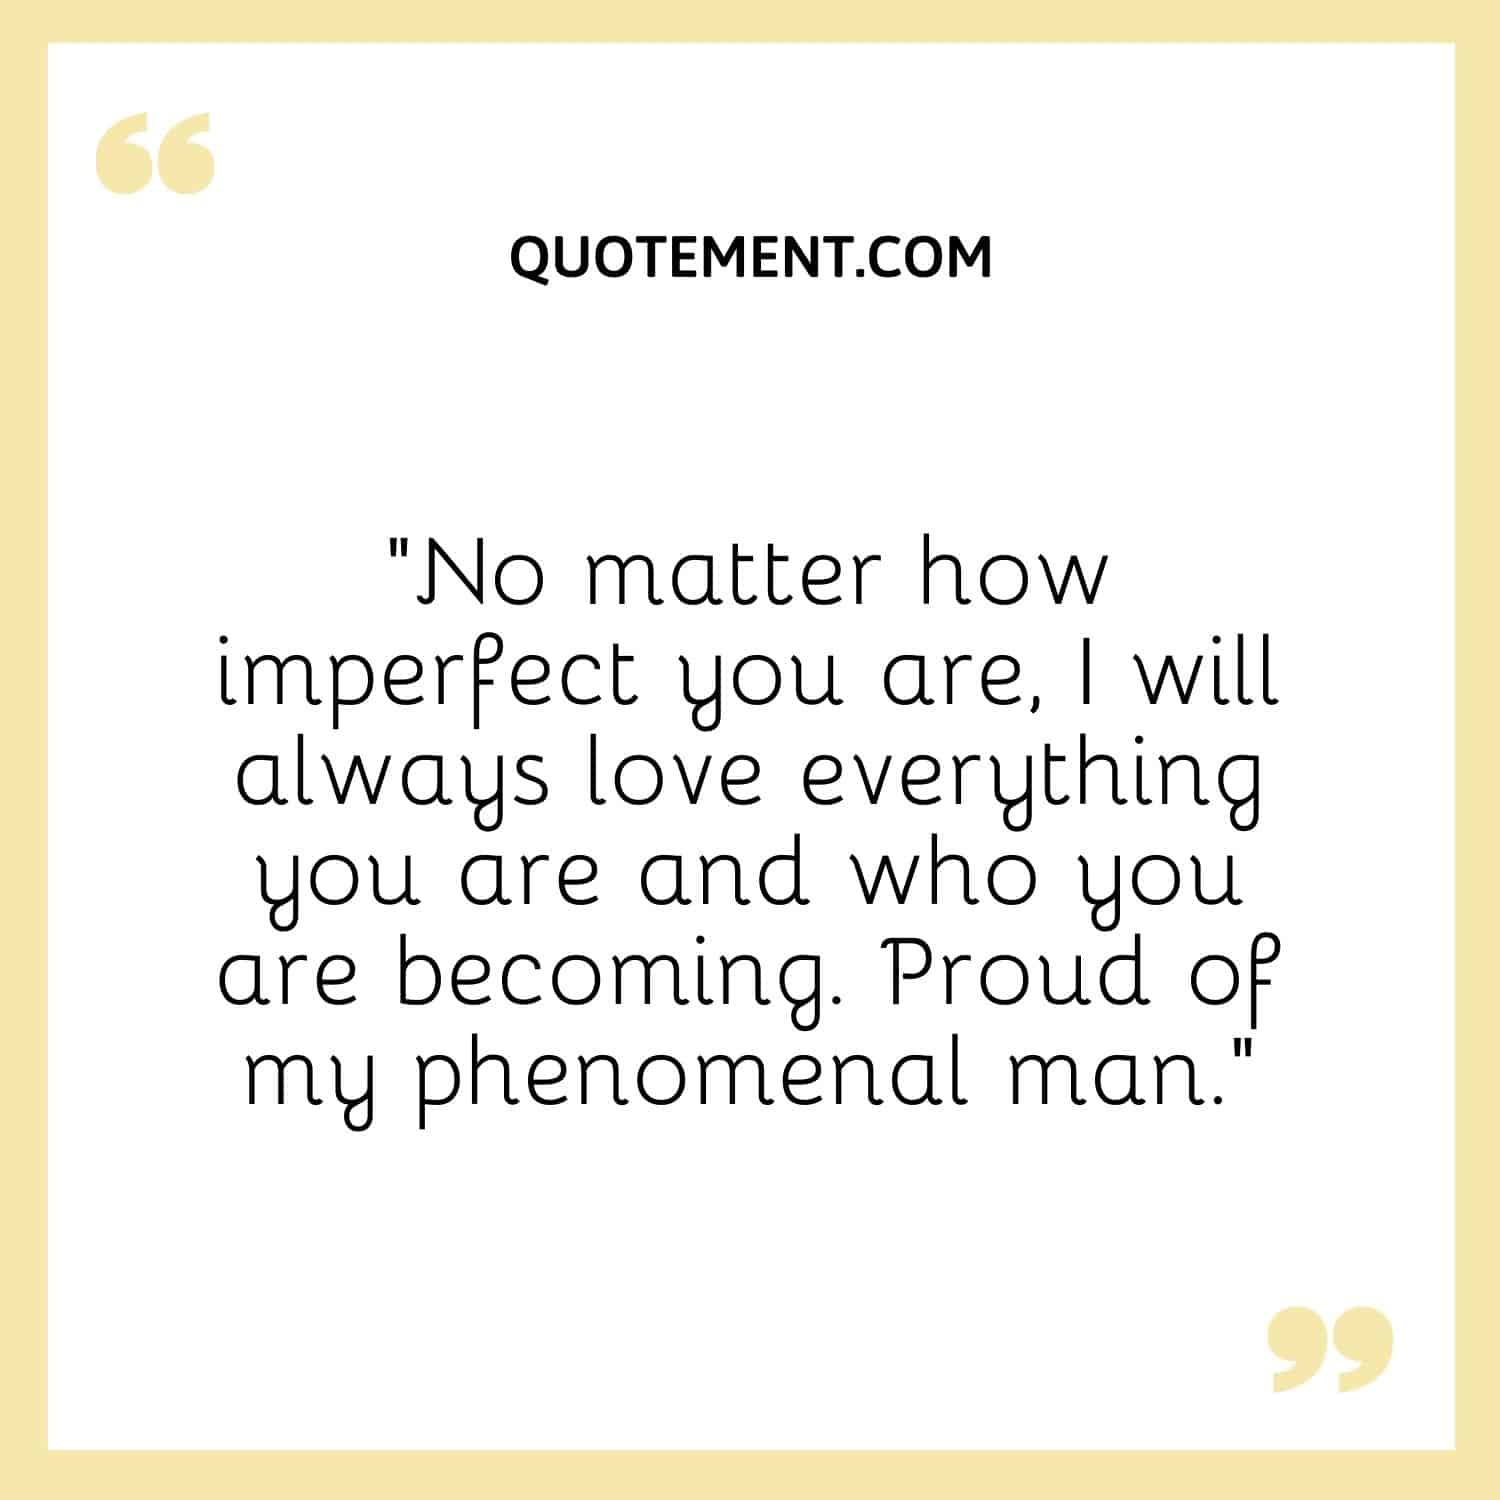 “No matter how imperfect you are, I will always love everything you are and who you are becoming. Proud of my phenomenal man.”